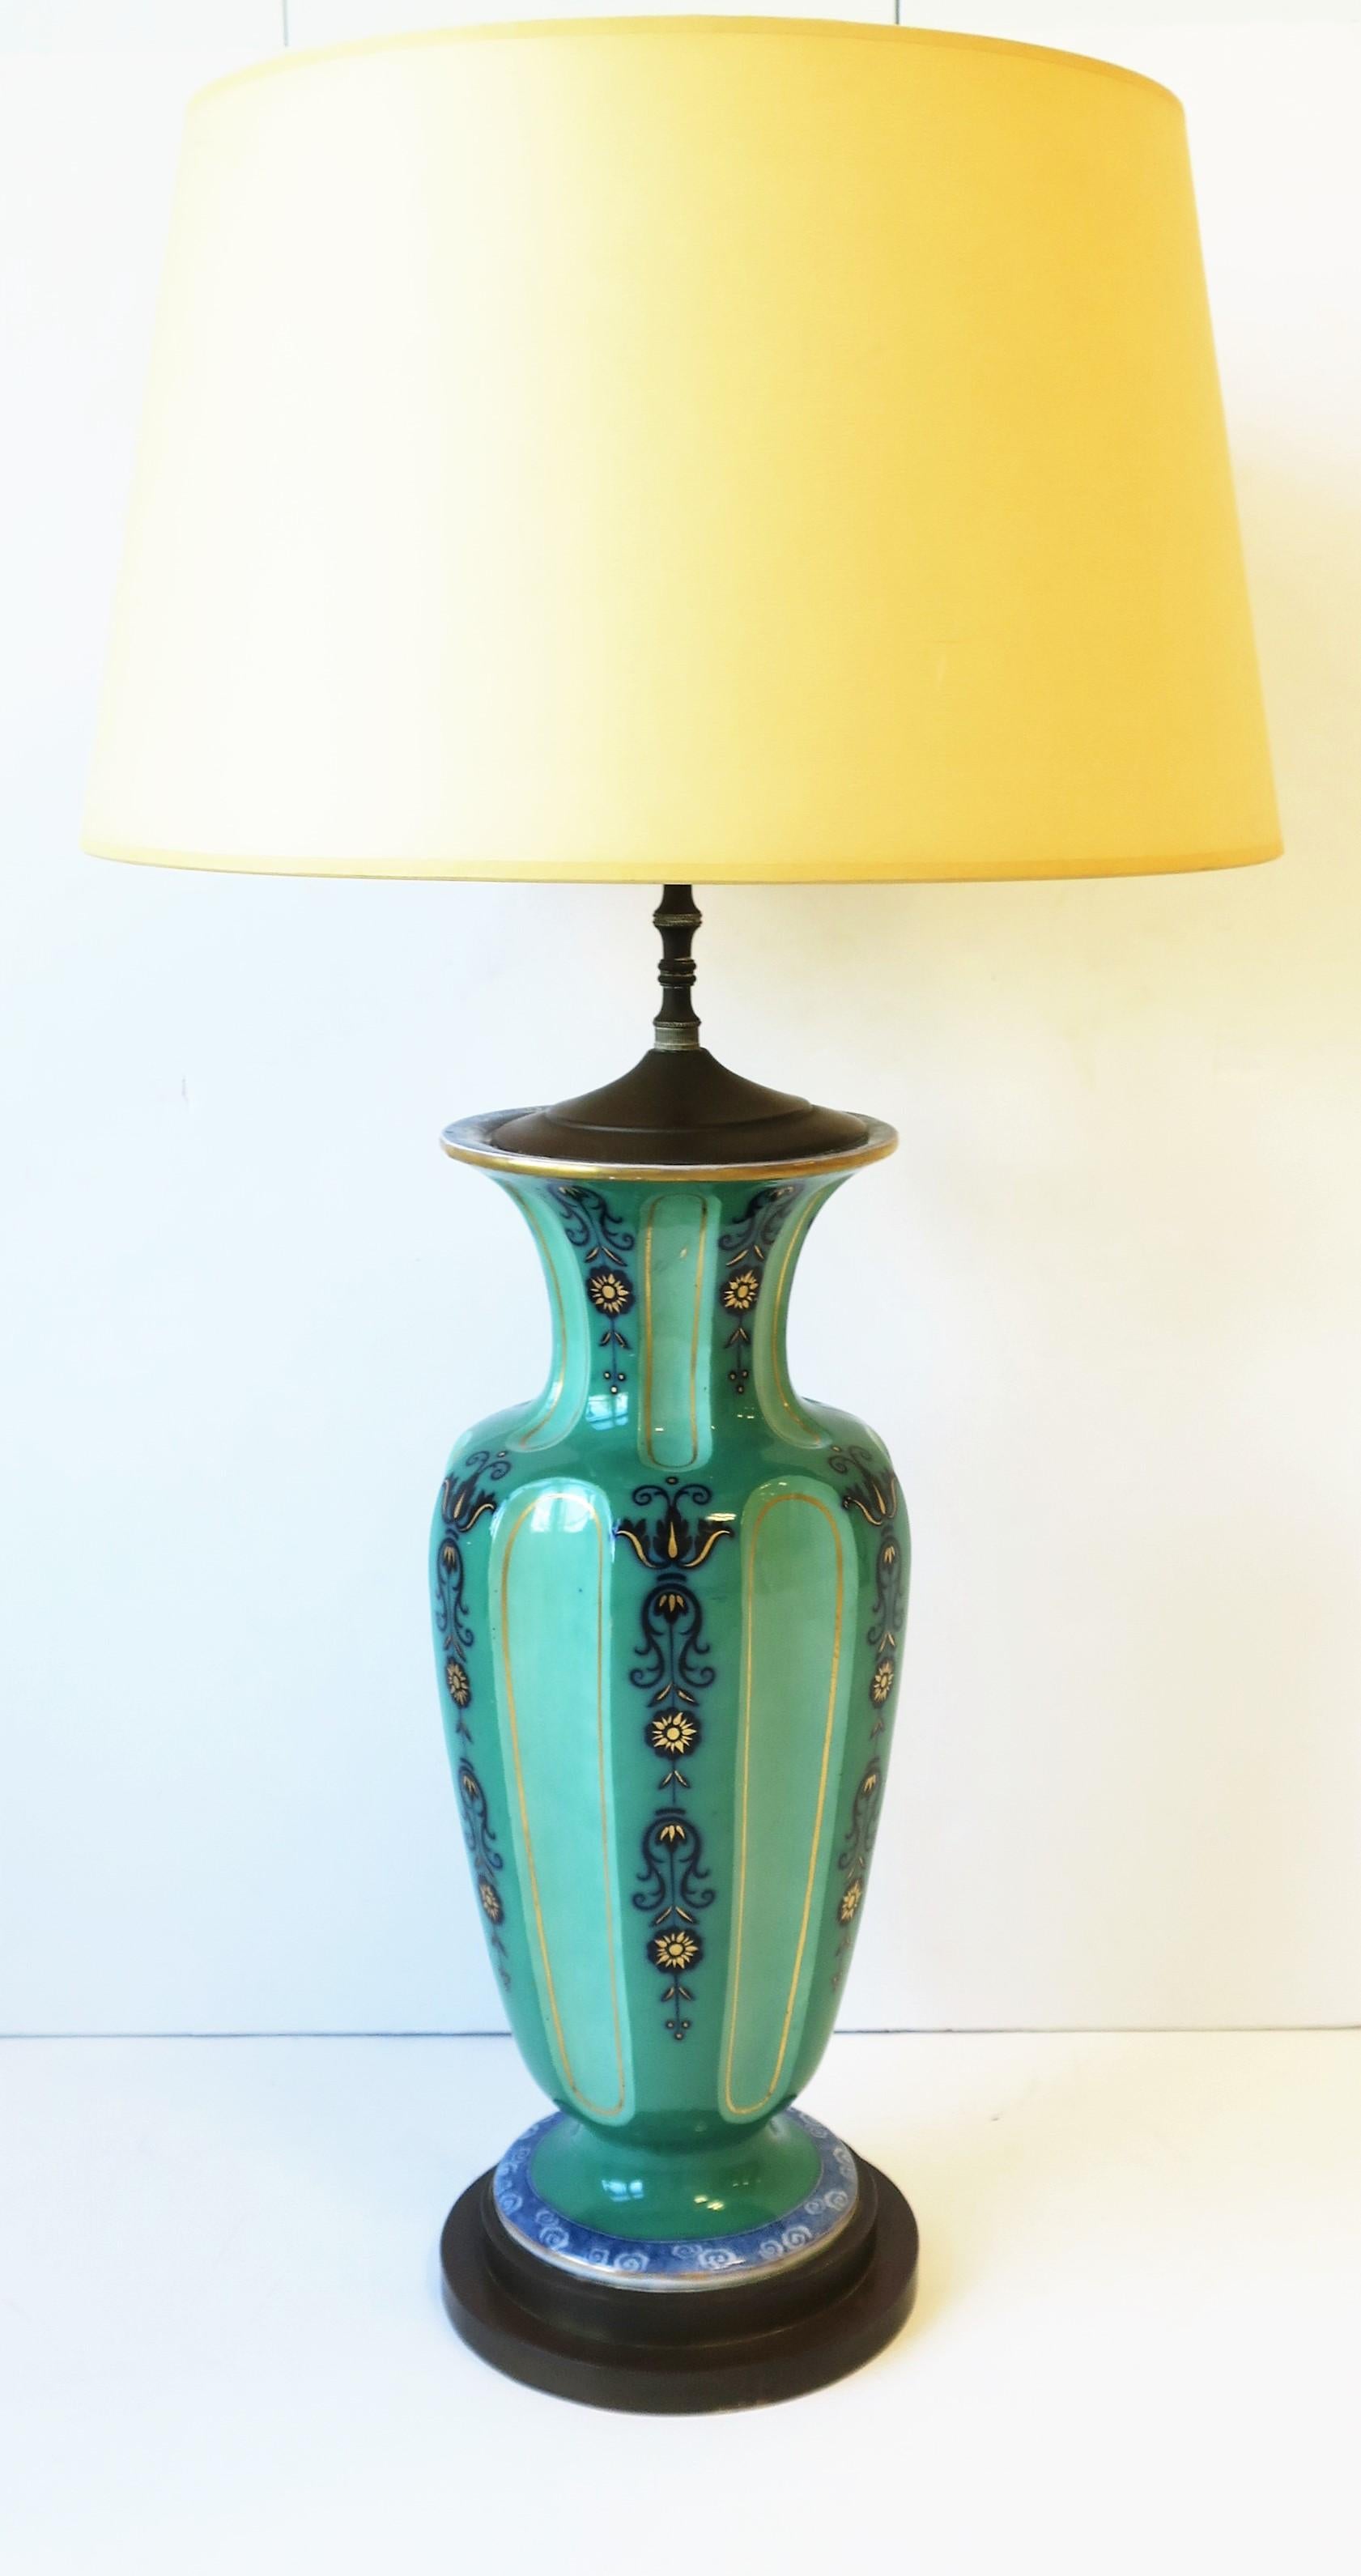 Dutch Blue White Green Ceramic Table Lamps Ginger Jar Style, circa 1930s For Sale 4